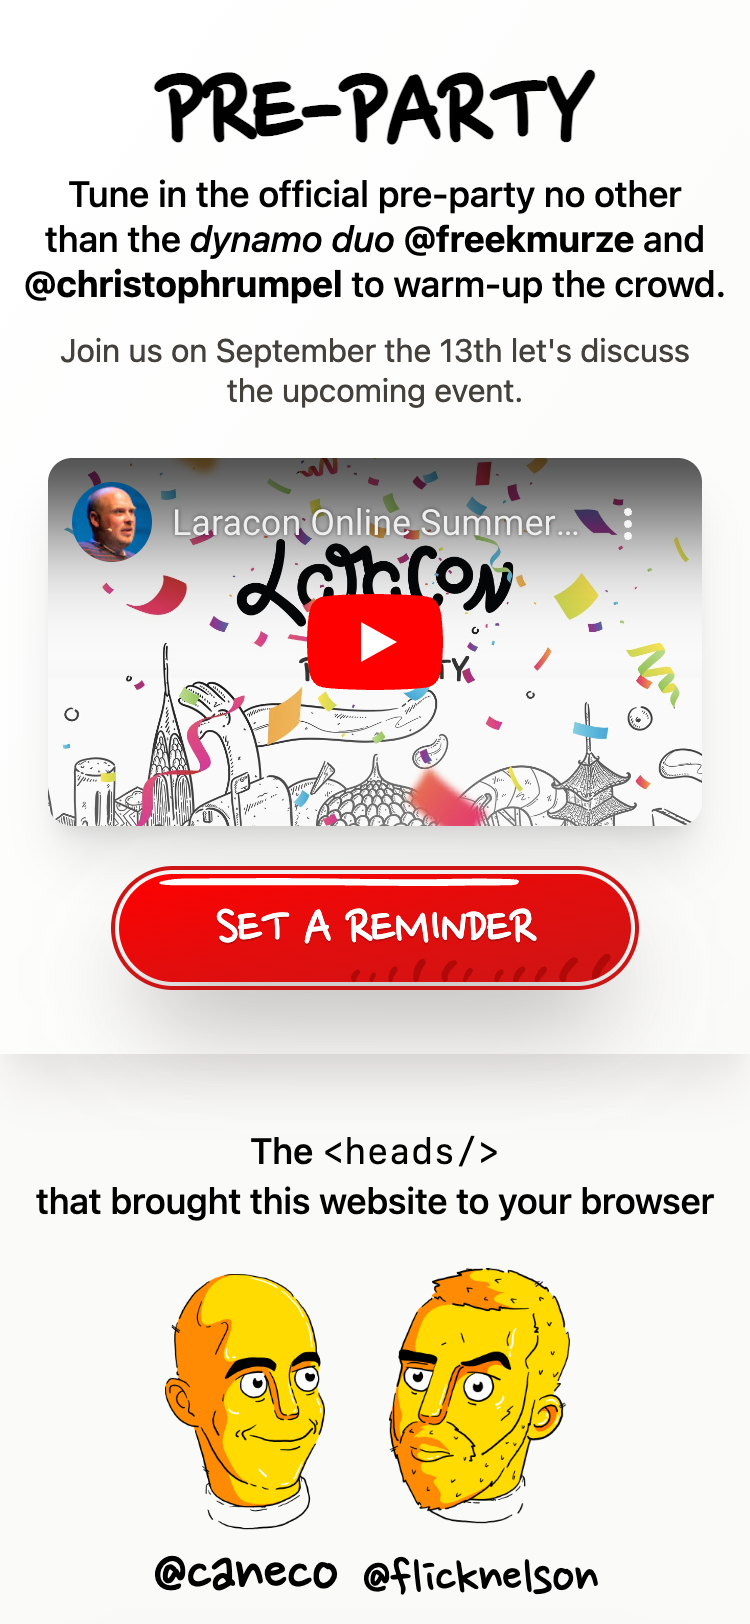 Mobile screenshot of the 'Pre-Party' section of the Laracon Online website. The section contains an embedded YouTube video and a large 'Set a reminder' button. At the bottom of the screen is a stylized illustration of the creators of the website.